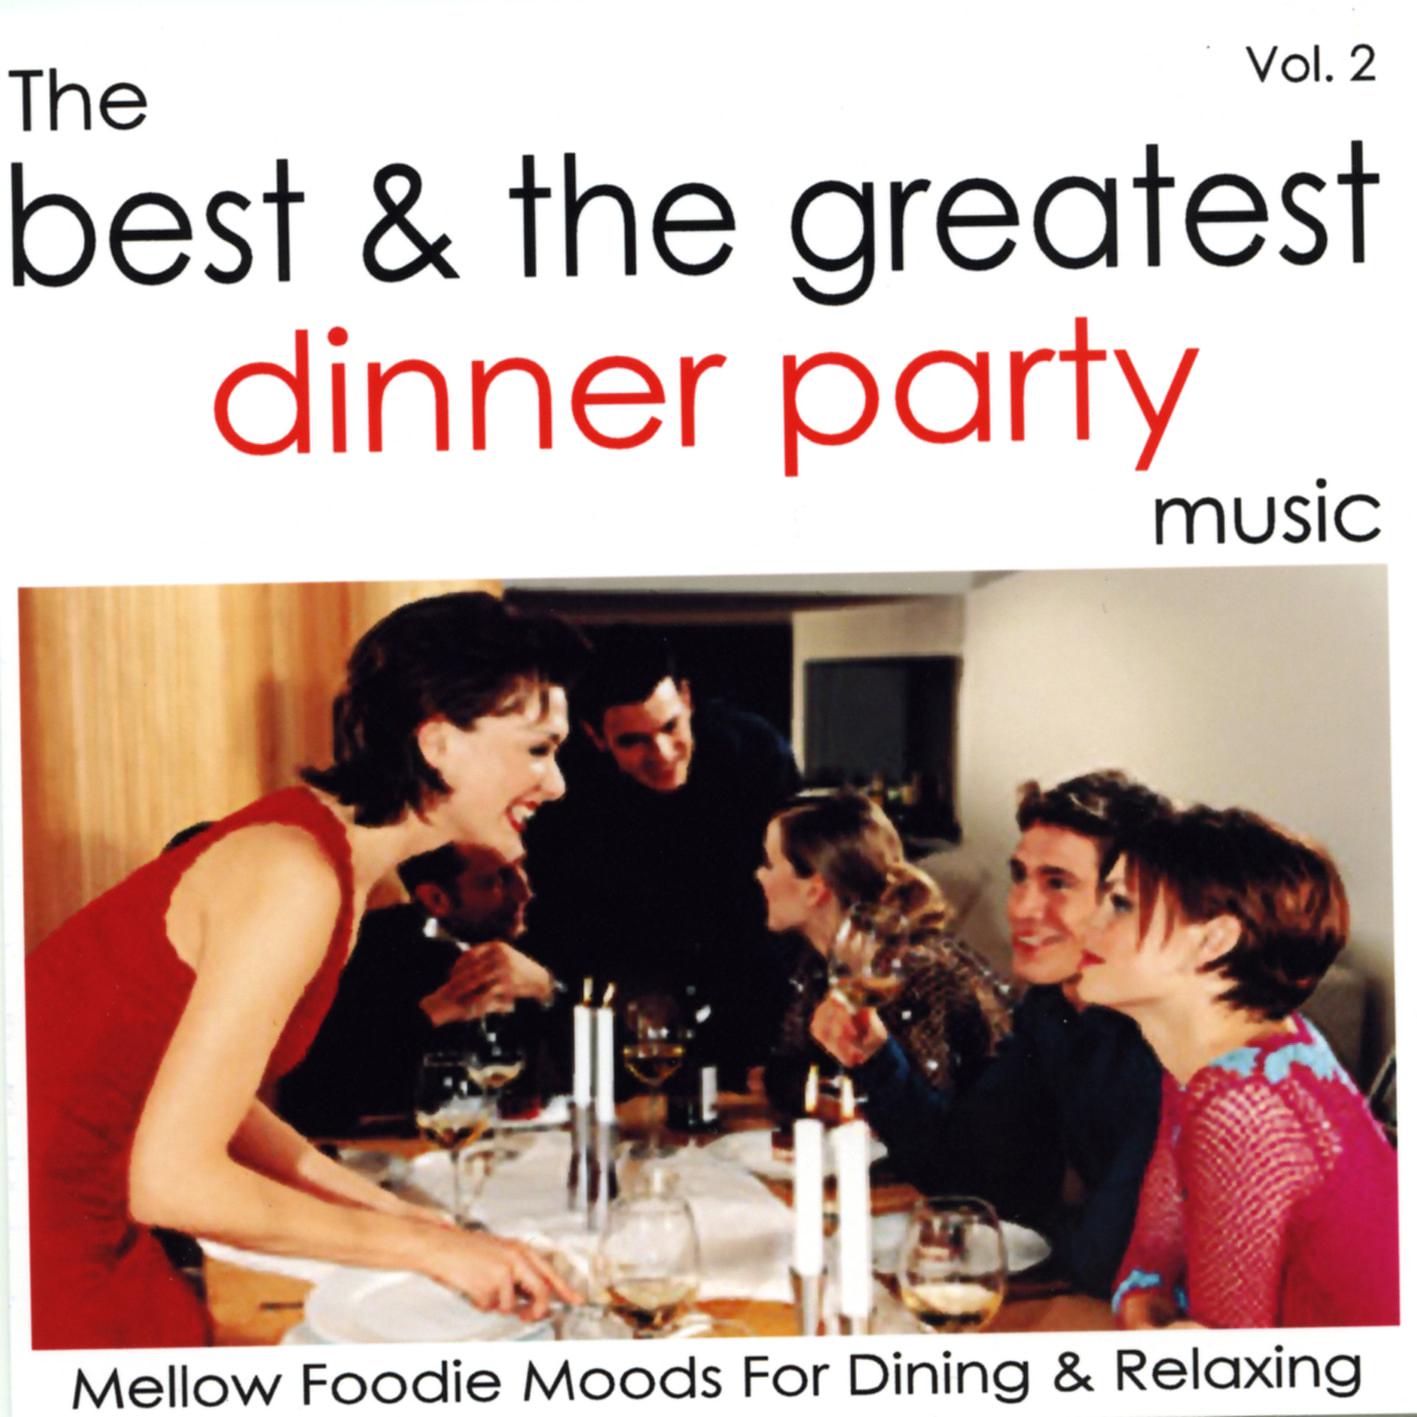 The Best & The Greatest Dinner Party Music - Vol.2